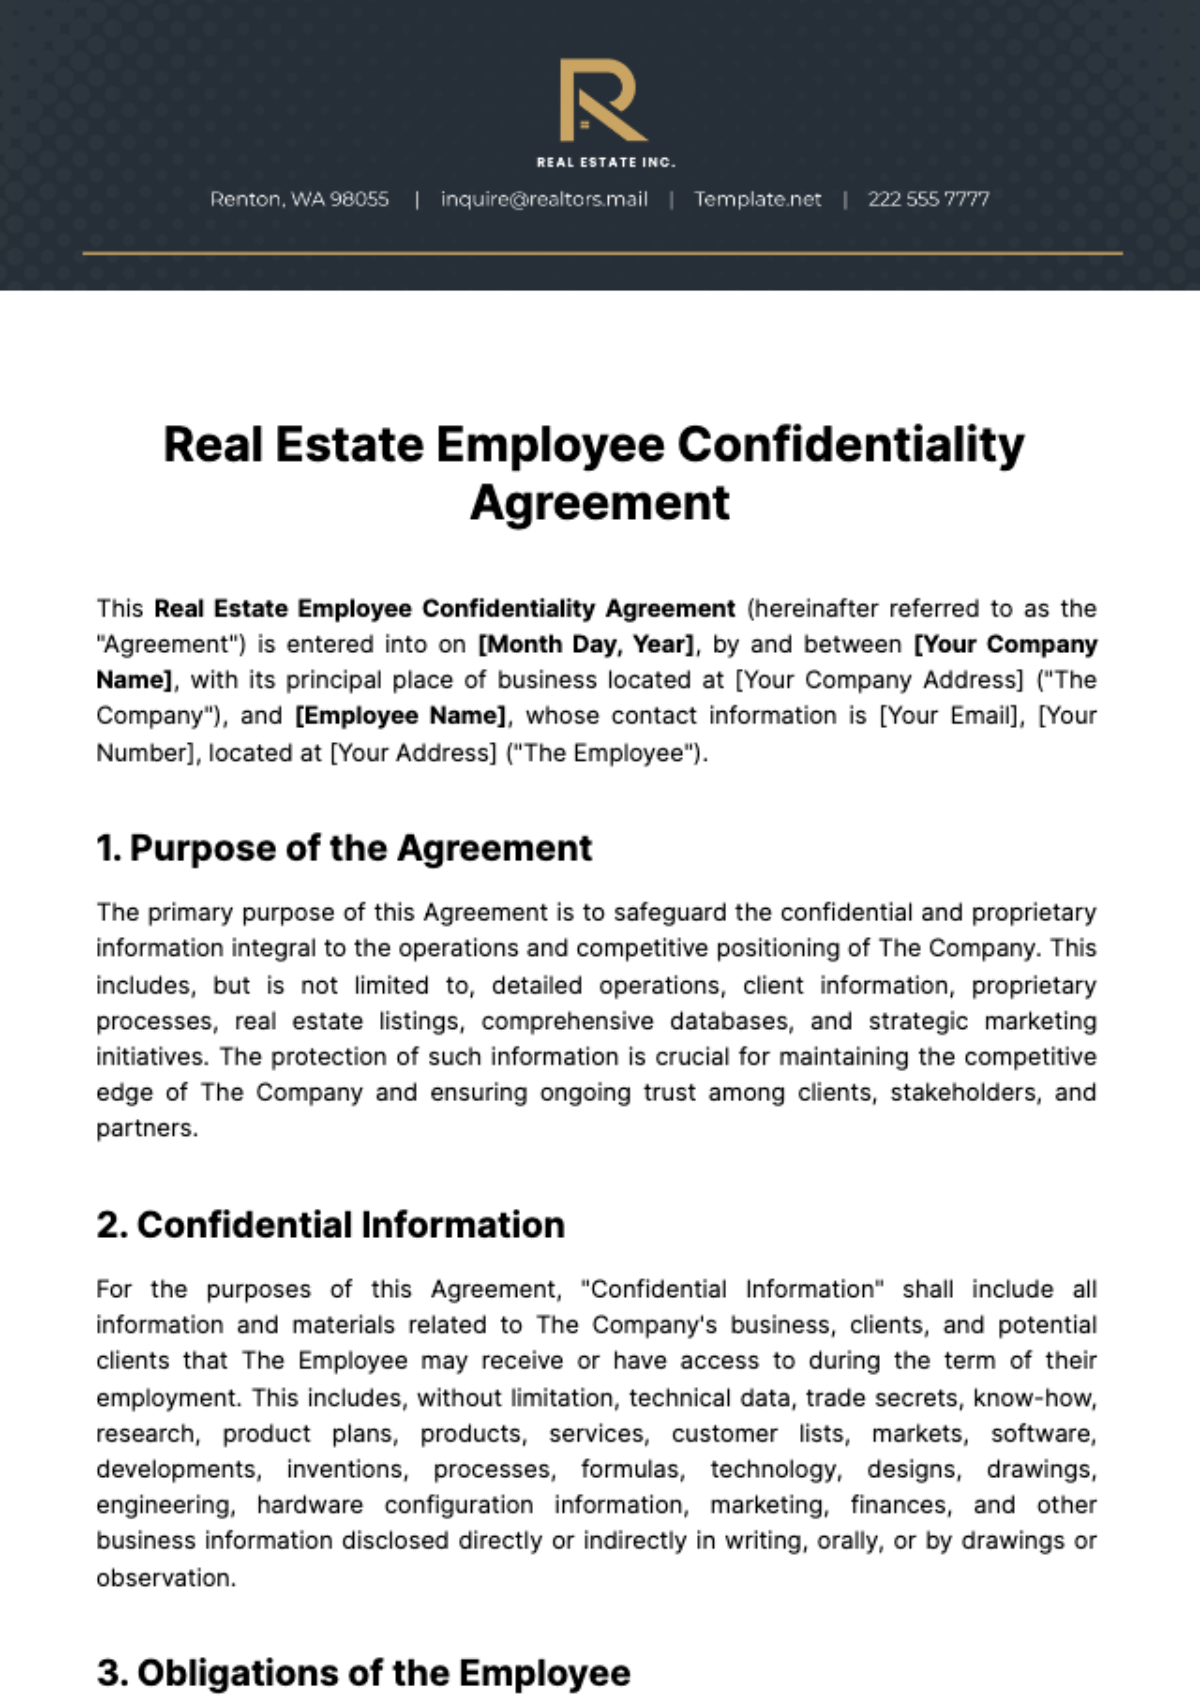 Real Estate Employee Confidentiality Agreement Template